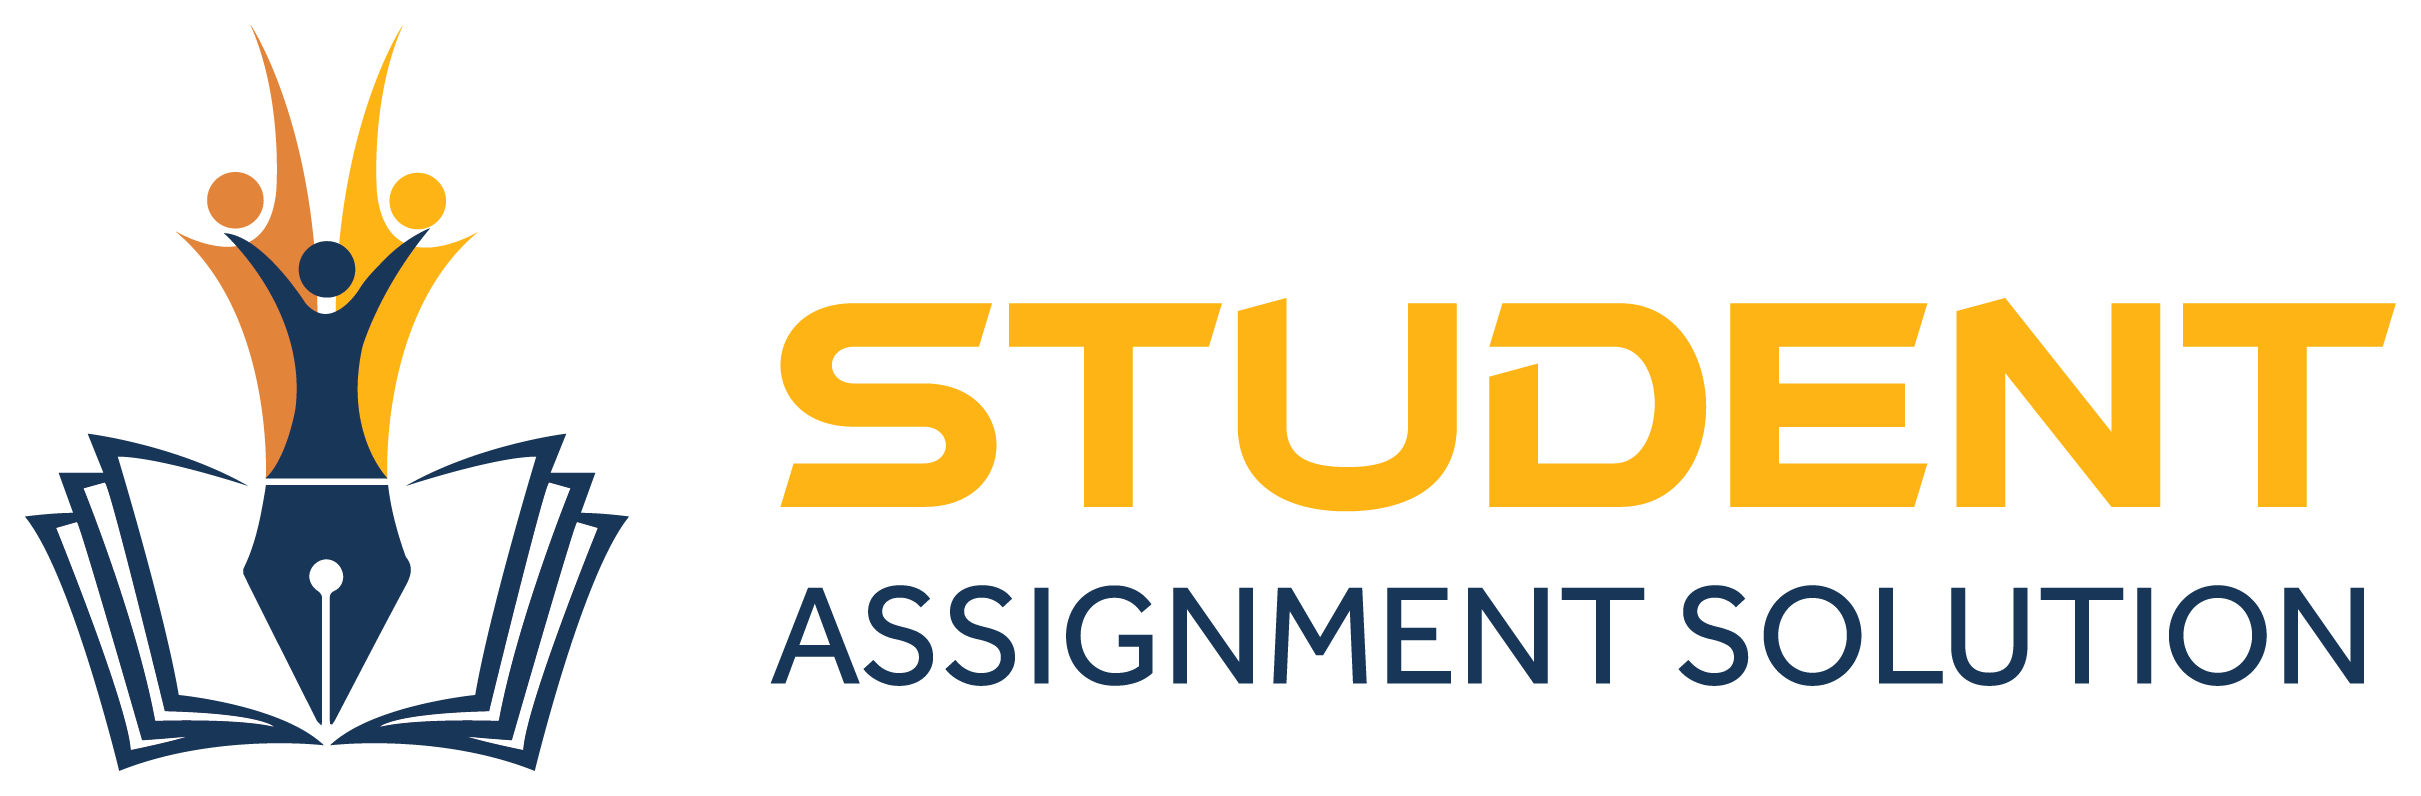 Online Assignment Writing Services-Student Assignment Solution